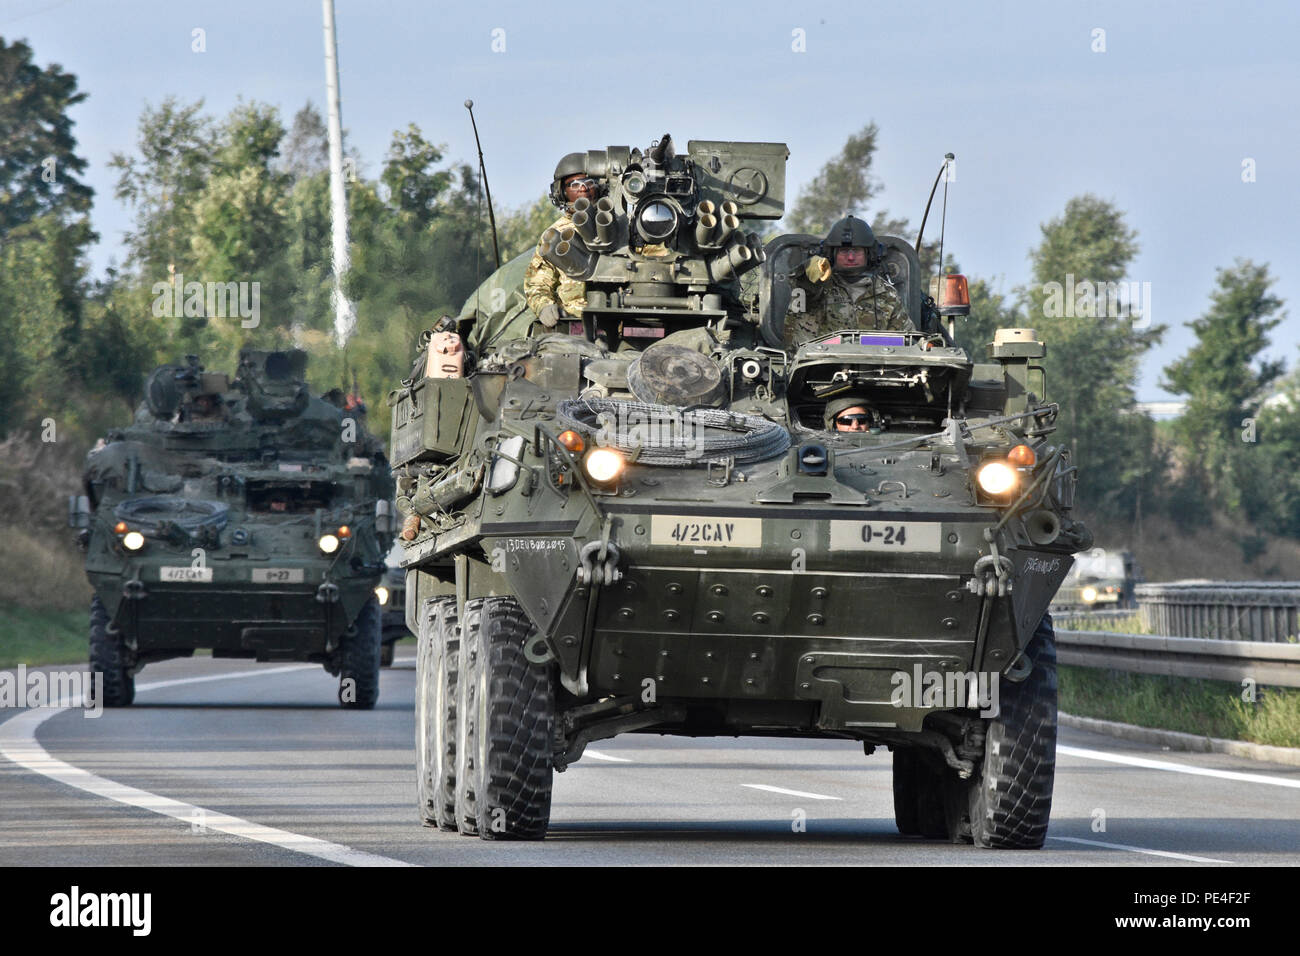 Troopers assigned to 4th Squadron, 2nd Cavalry Regiment, operate their M1126 Stryker Combat Vehicles during Dragoon Crossing, a tactical road march starting out at Rose Barracks, Germany and continuing through the Czech Republic and the Slovak Republic ending in Hungary Sept. 13, 2015. The purpose of the exercise is to reassure NATO allies of the U.S. intent during Operation Atlantic Resolve while demonstrating interoperability and freedom of movement throughout Eastern Europe. (U.S. Army photo by Sgt. William A. Tanner/released) Stock Photo